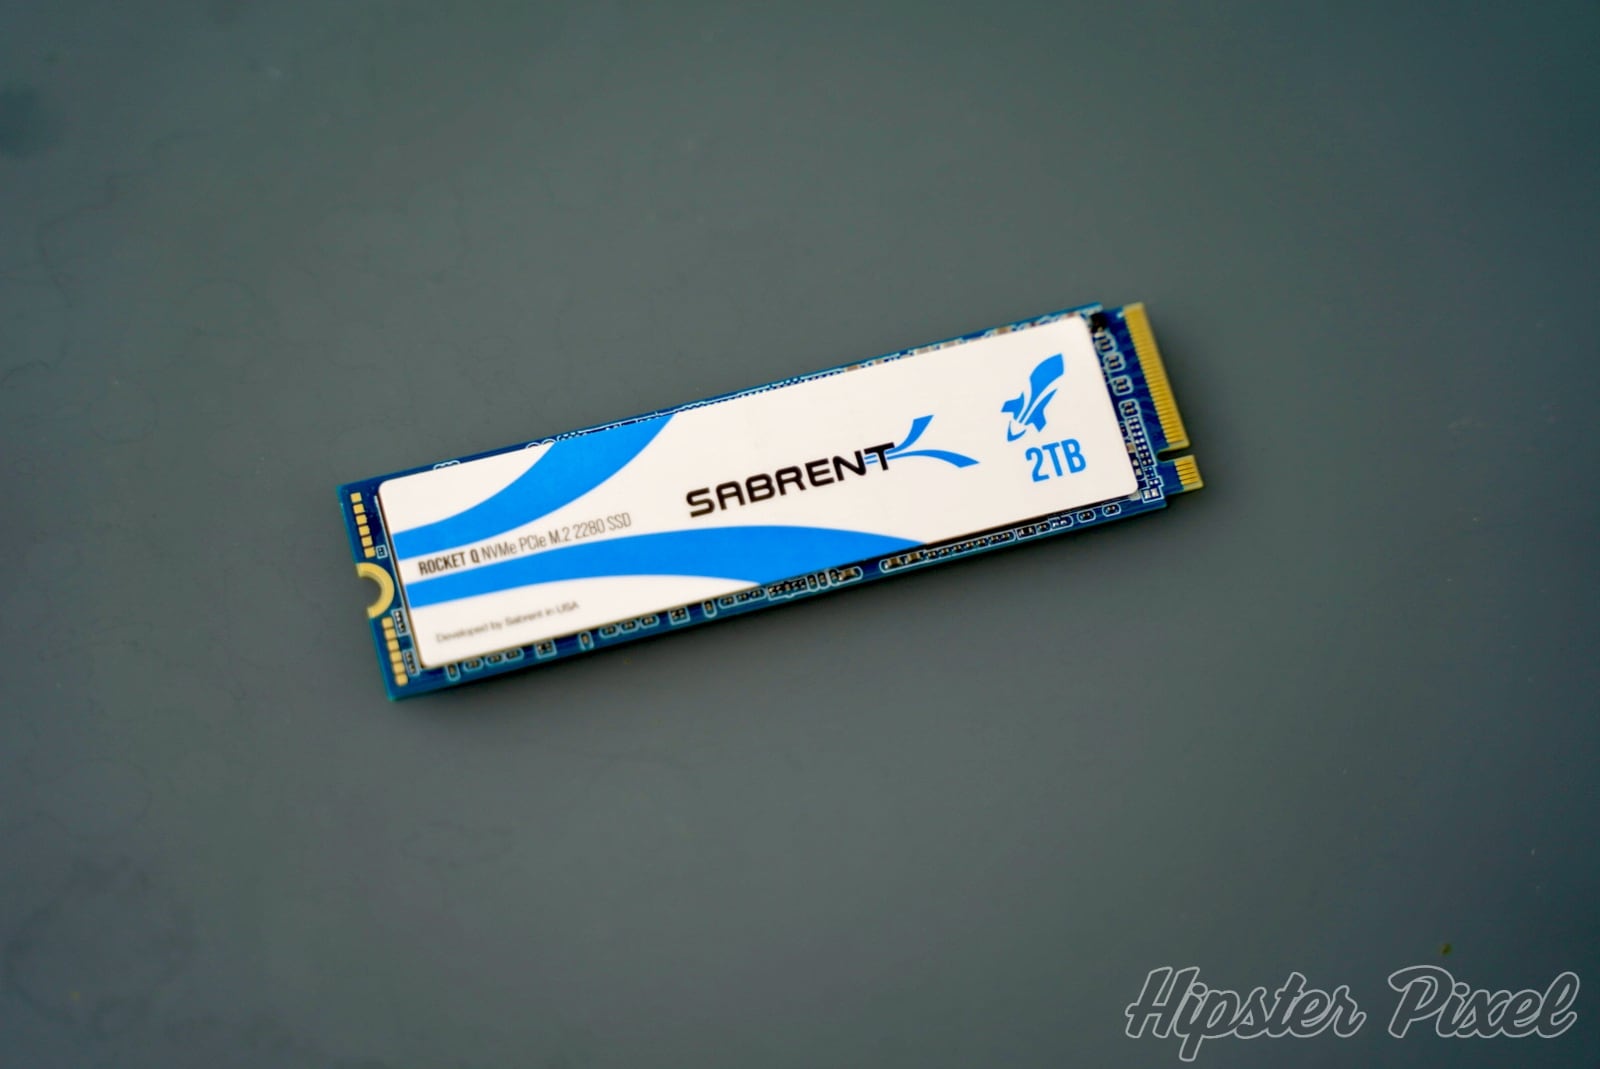 Sabrent Rocket Q 2 TB NVMe SSD, a Small but Blazing Fast Drive! [Review]